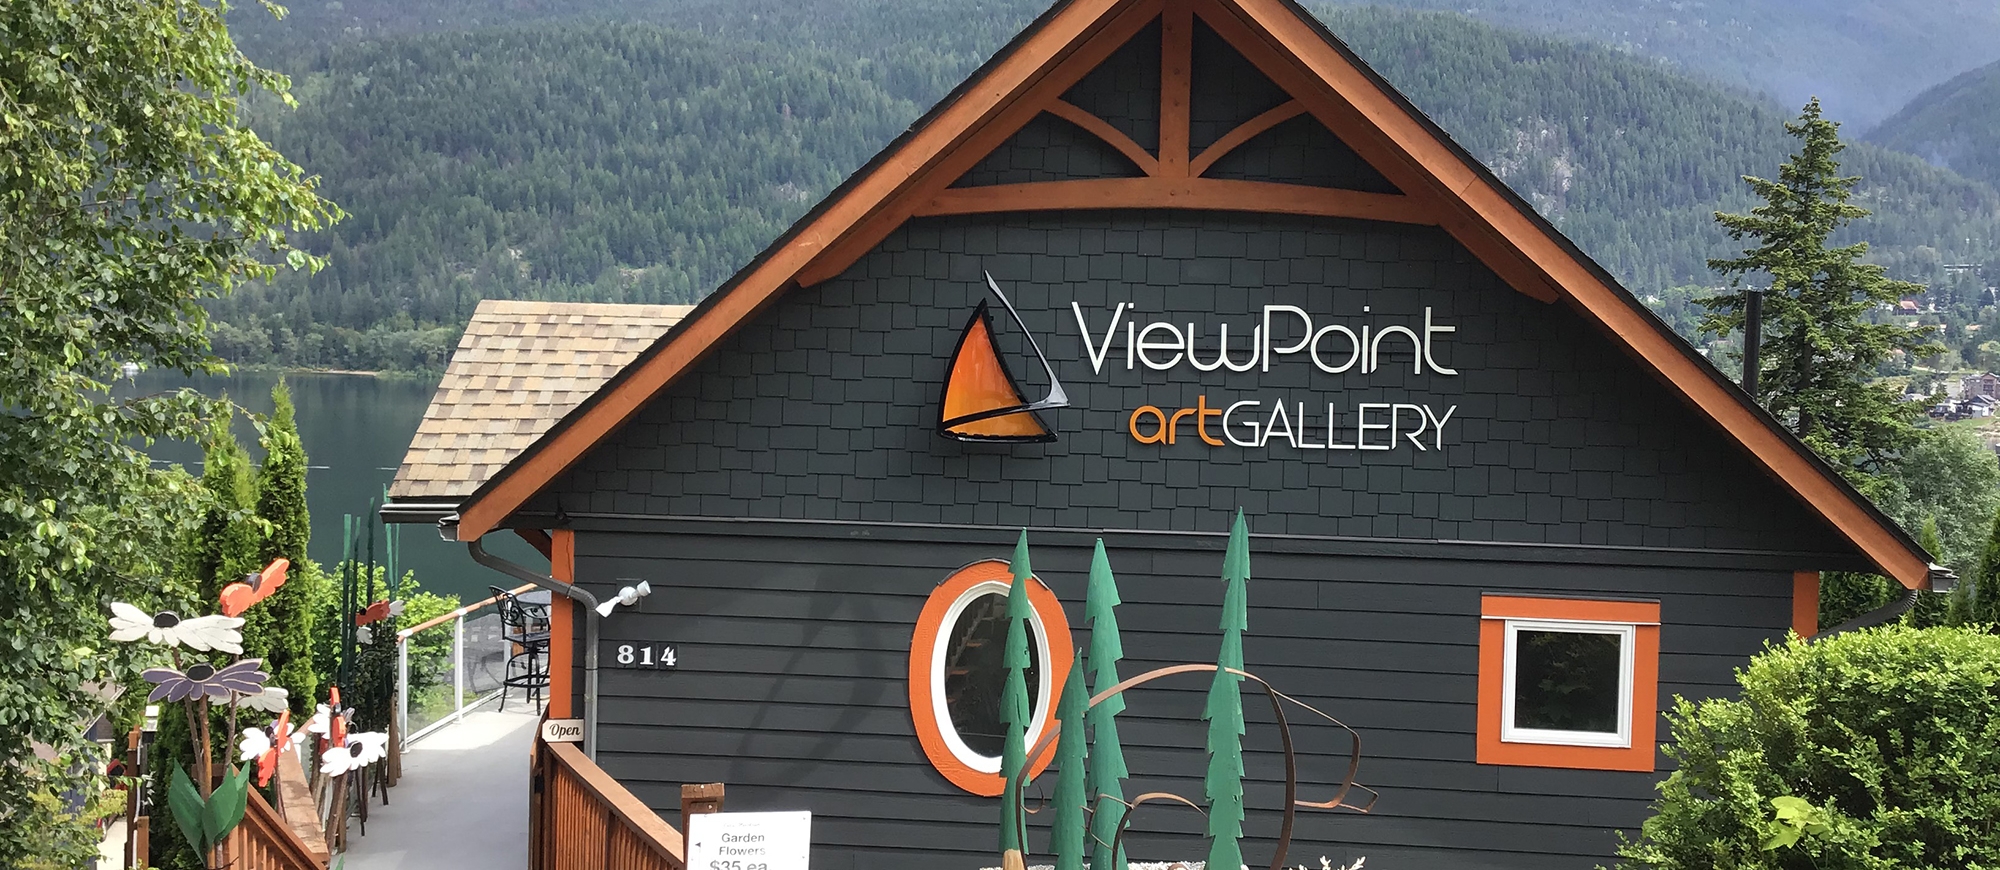 the Viewpoint Art Gallery building sitting above Kootenay Lake with mountains in the background